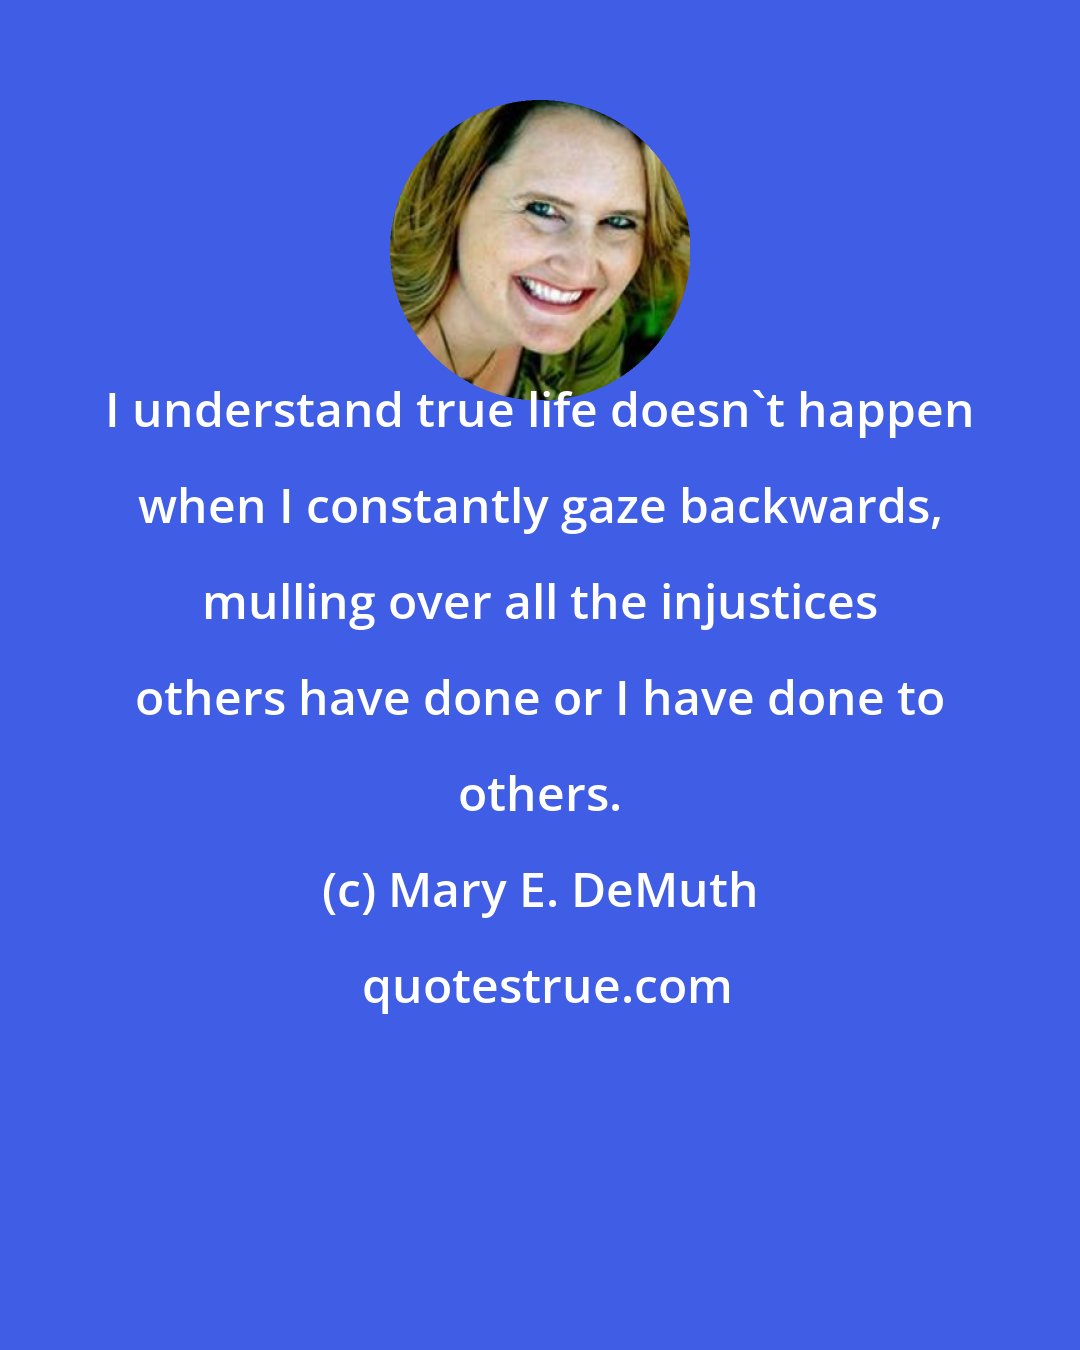 Mary E. DeMuth: I understand true life doesn't happen when I constantly gaze backwards, mulling over all the injustices others have done or I have done to others.